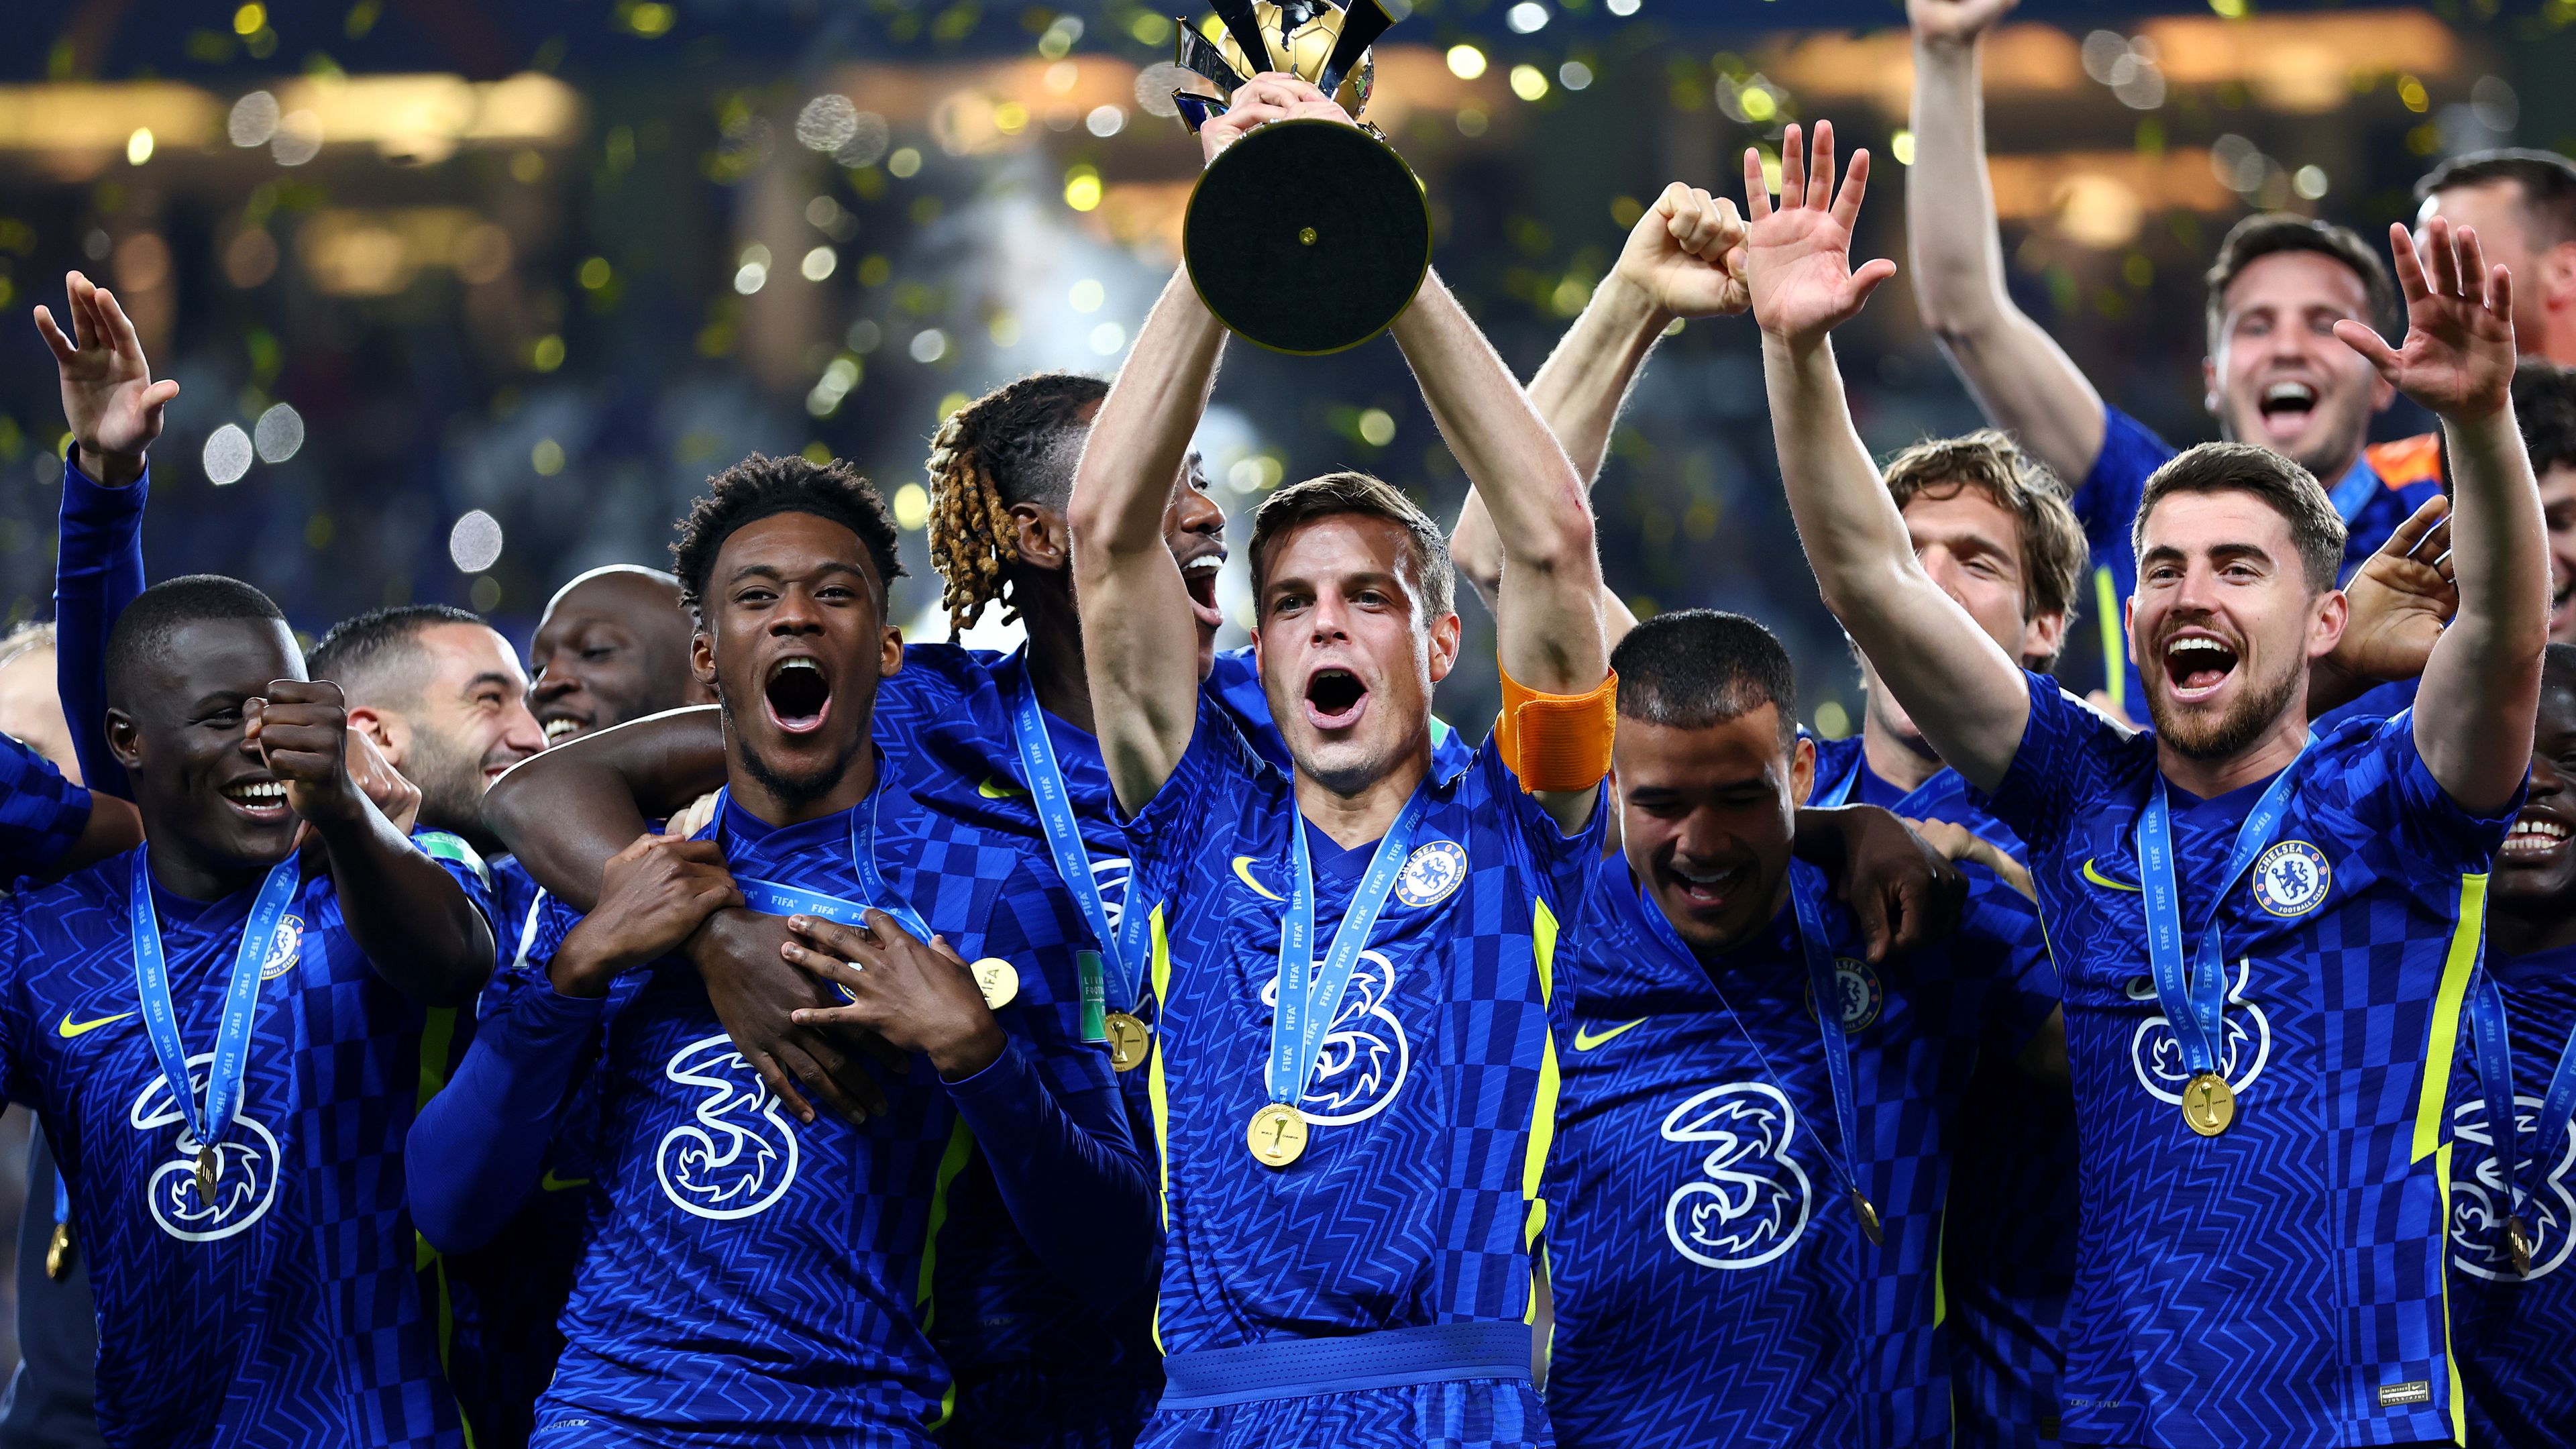 Chelsea make history by winning Club World Cup for first time